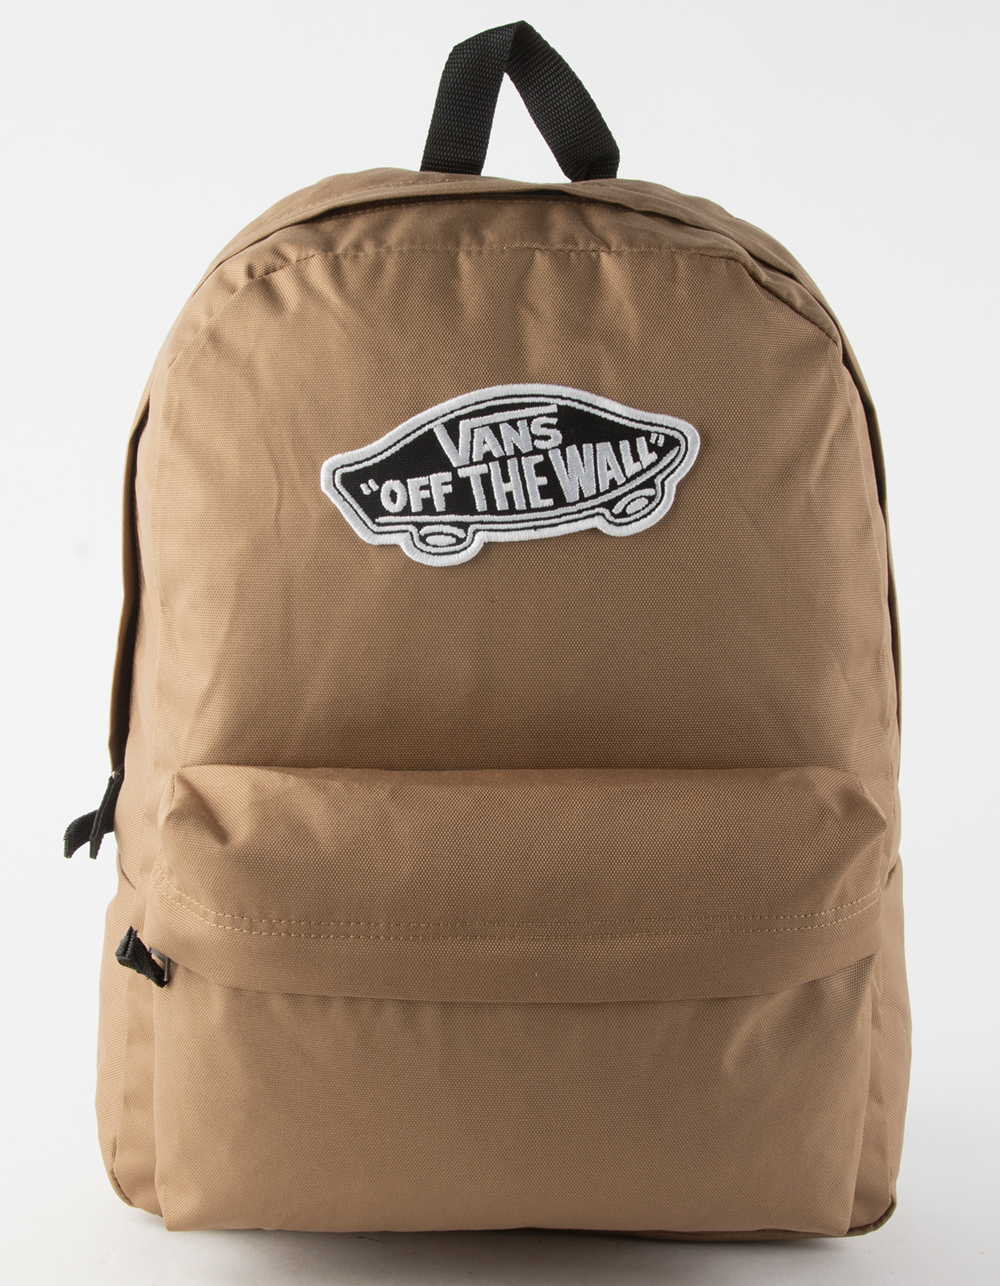 Van's Backpacks: Realm (3 colors) $18, Old Skool H20 (3 colors) $24 & More + Free Shipping on $49+